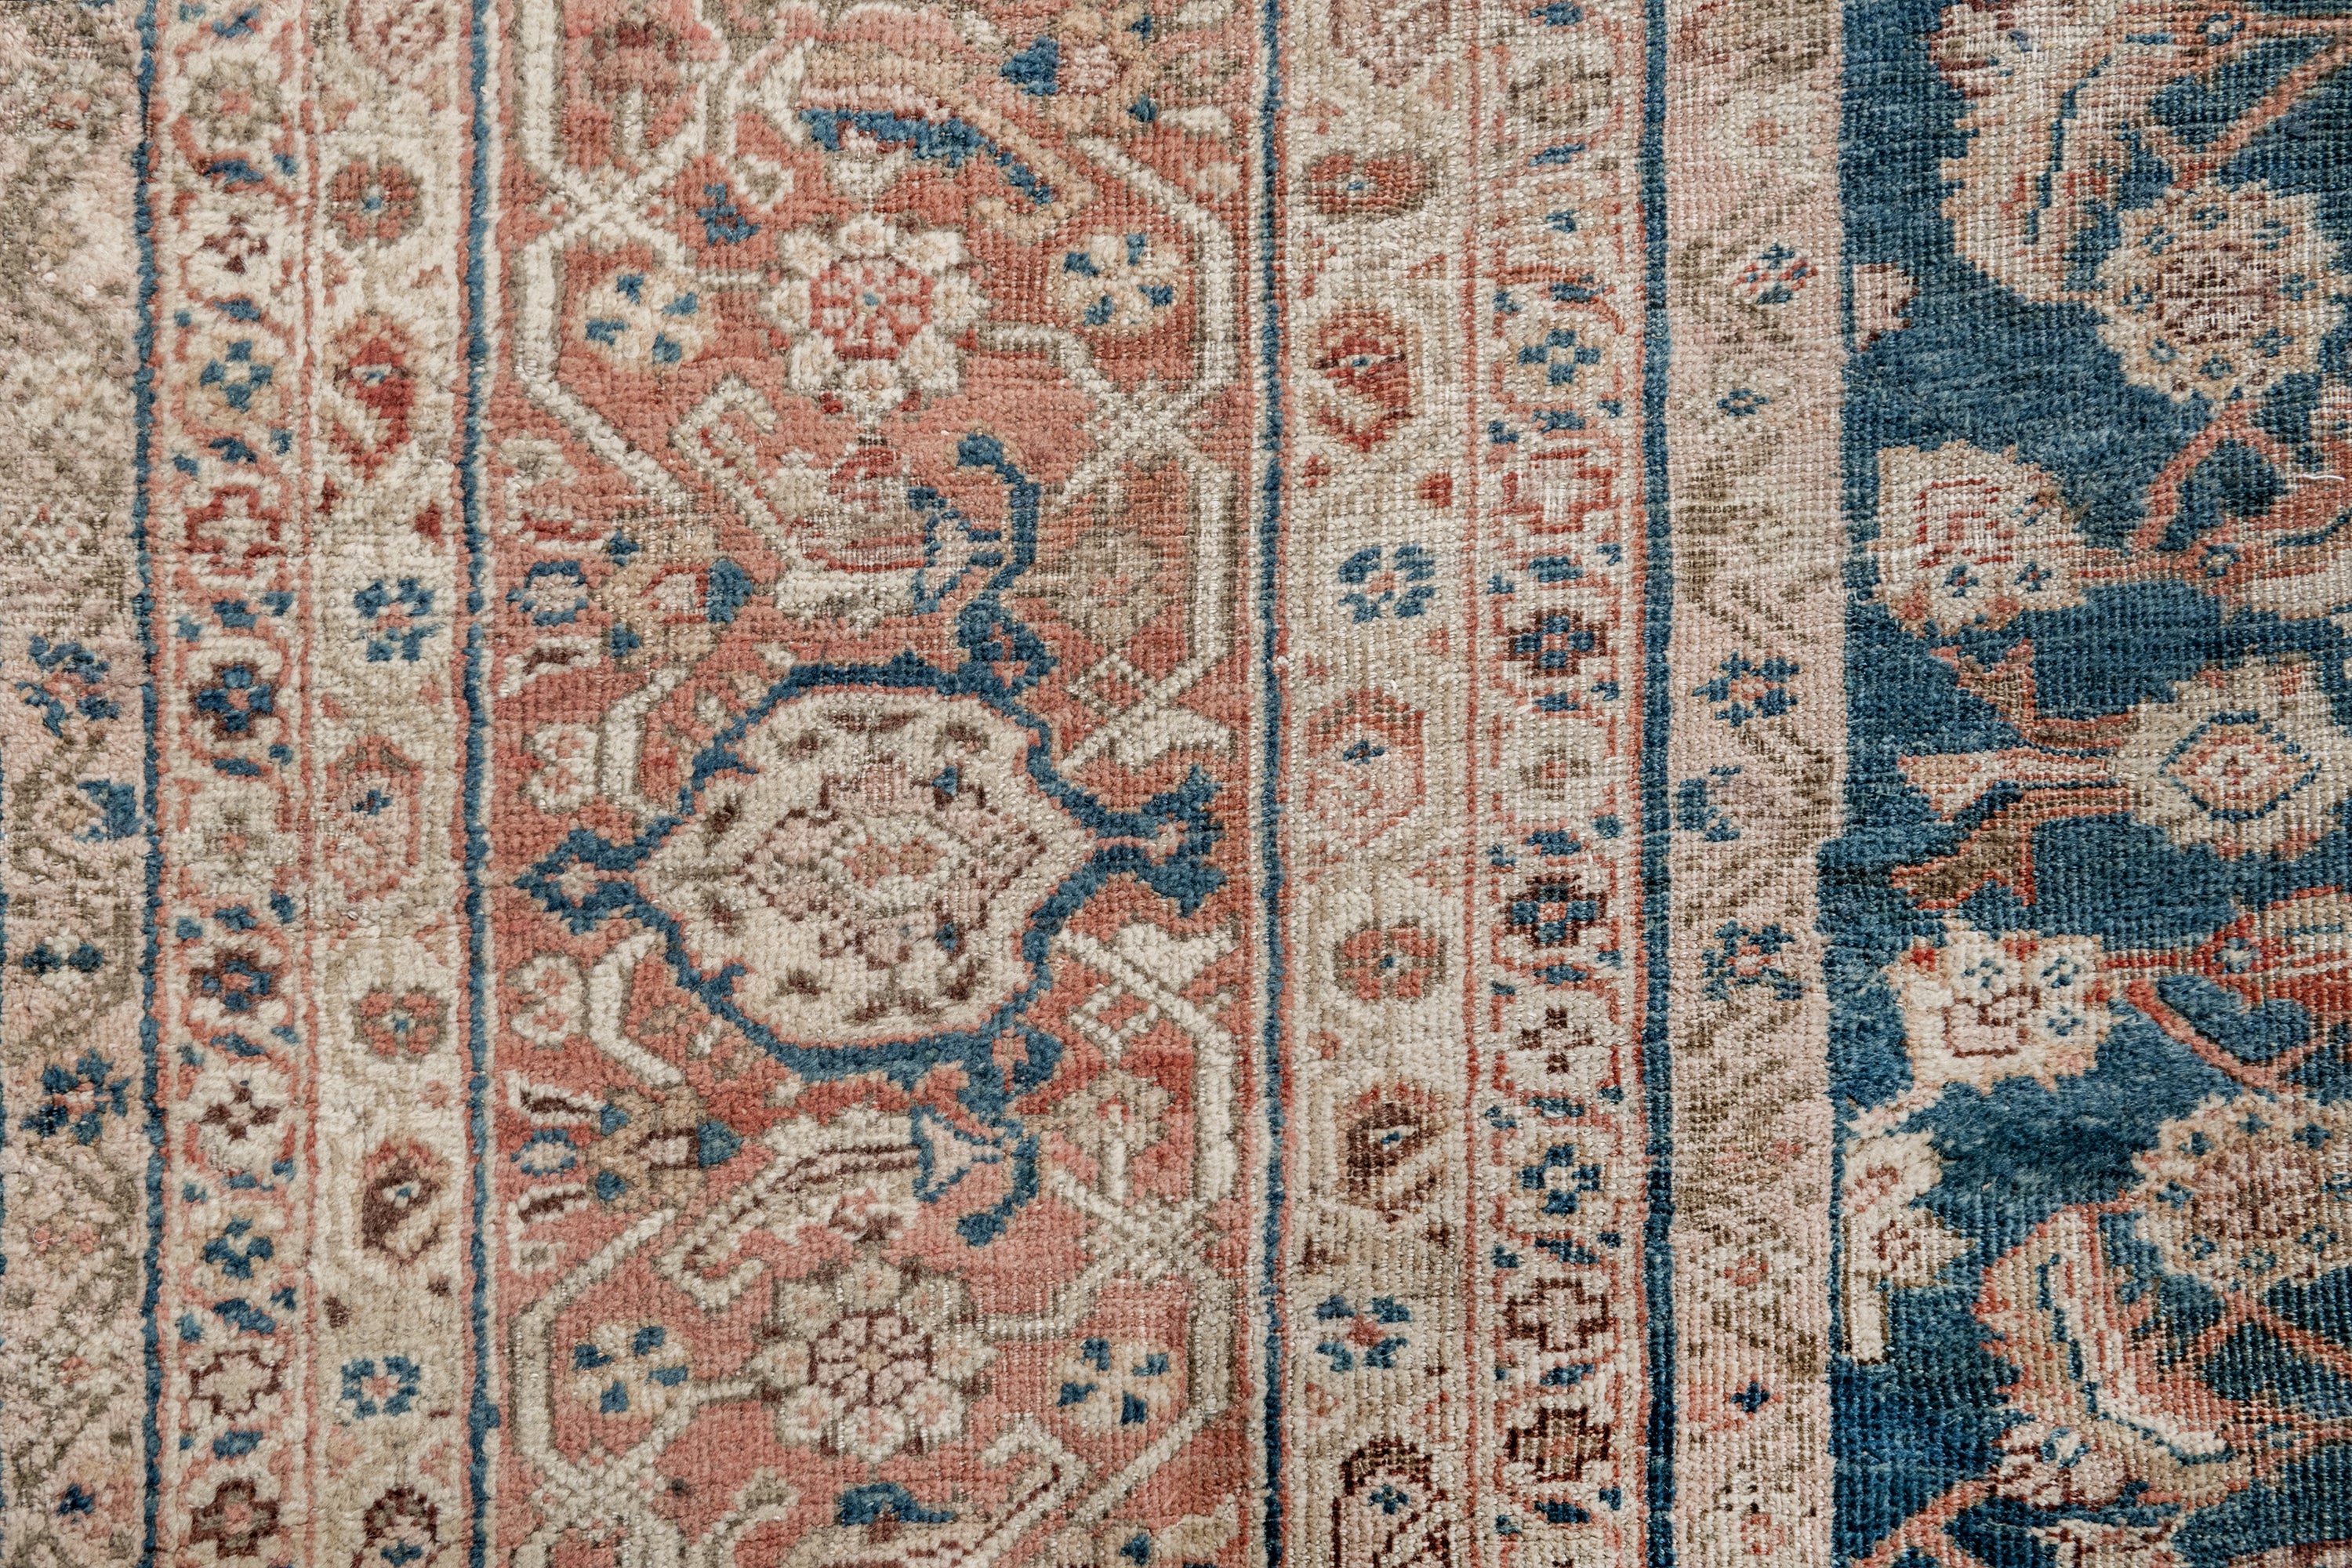 SULTANABAD RUG, AR31070/7256, WEST PERSIA, 13'2" X 16'7" - thumbnail 8